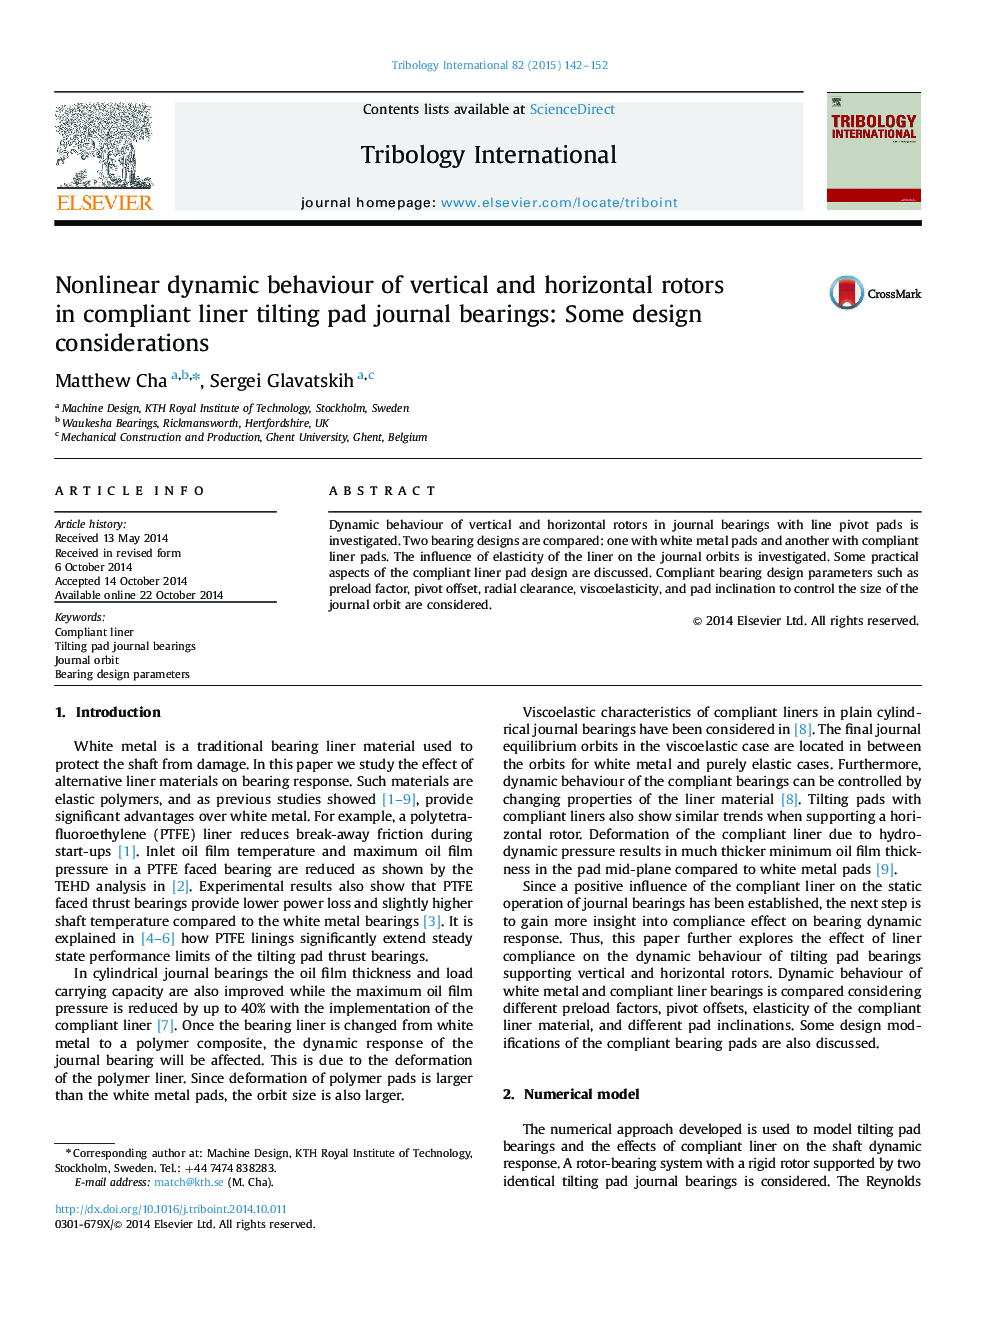 Nonlinear dynamic behaviour of vertical and horizontal rotors in compliant liner tilting pad journal bearings: Some design considerations